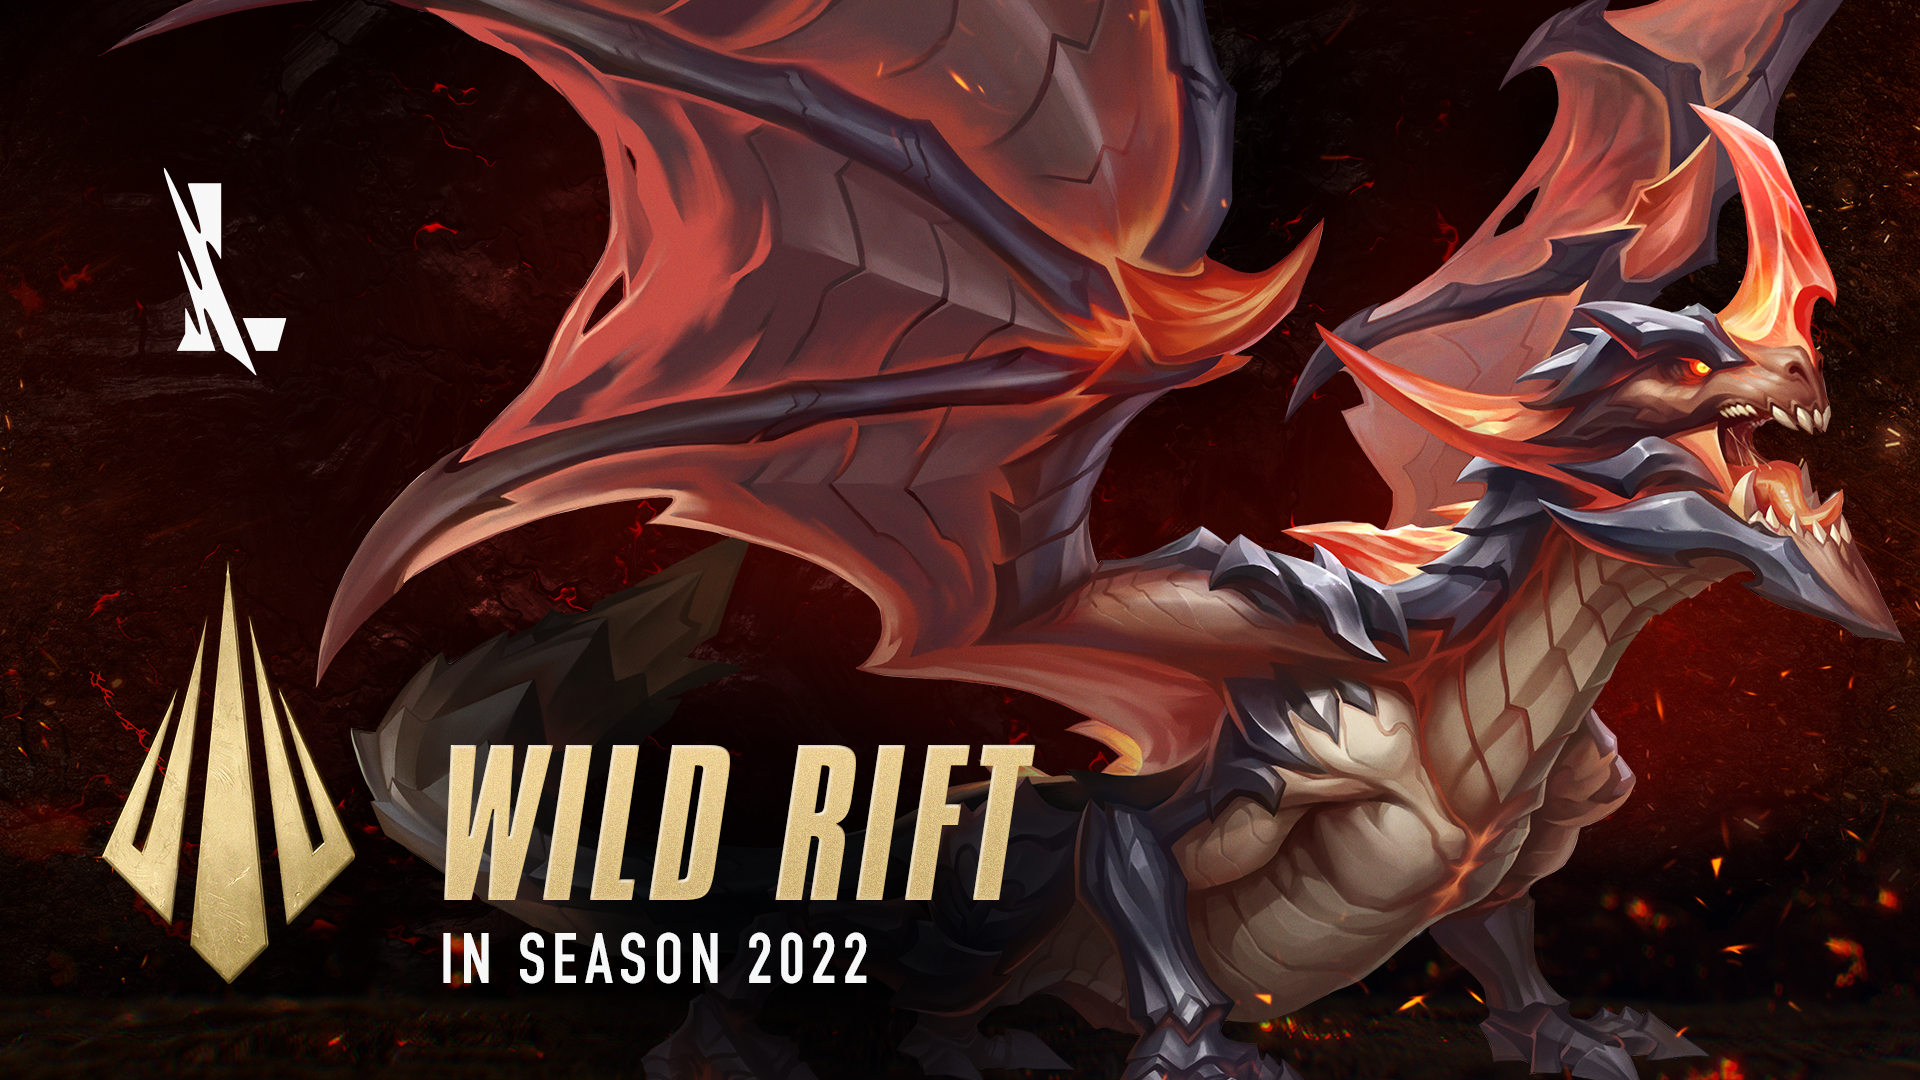 League Of Legends: Wild Rift Releases Patch 3.3 Today